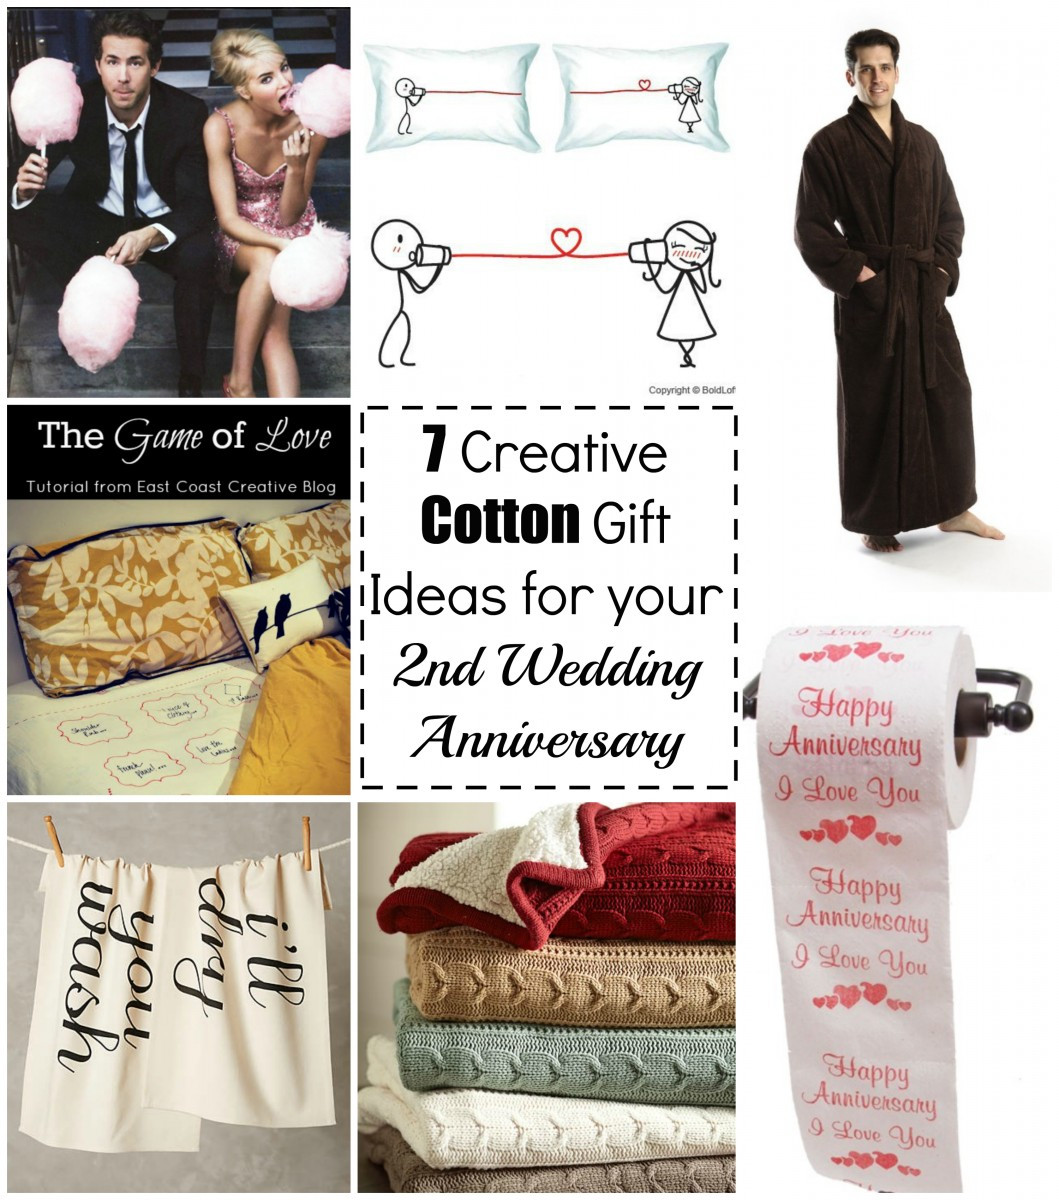 2nd Wedding Anniversary Gifts For Her
 7 Cotton Gift Ideas for your 2nd Wedding Anniversary